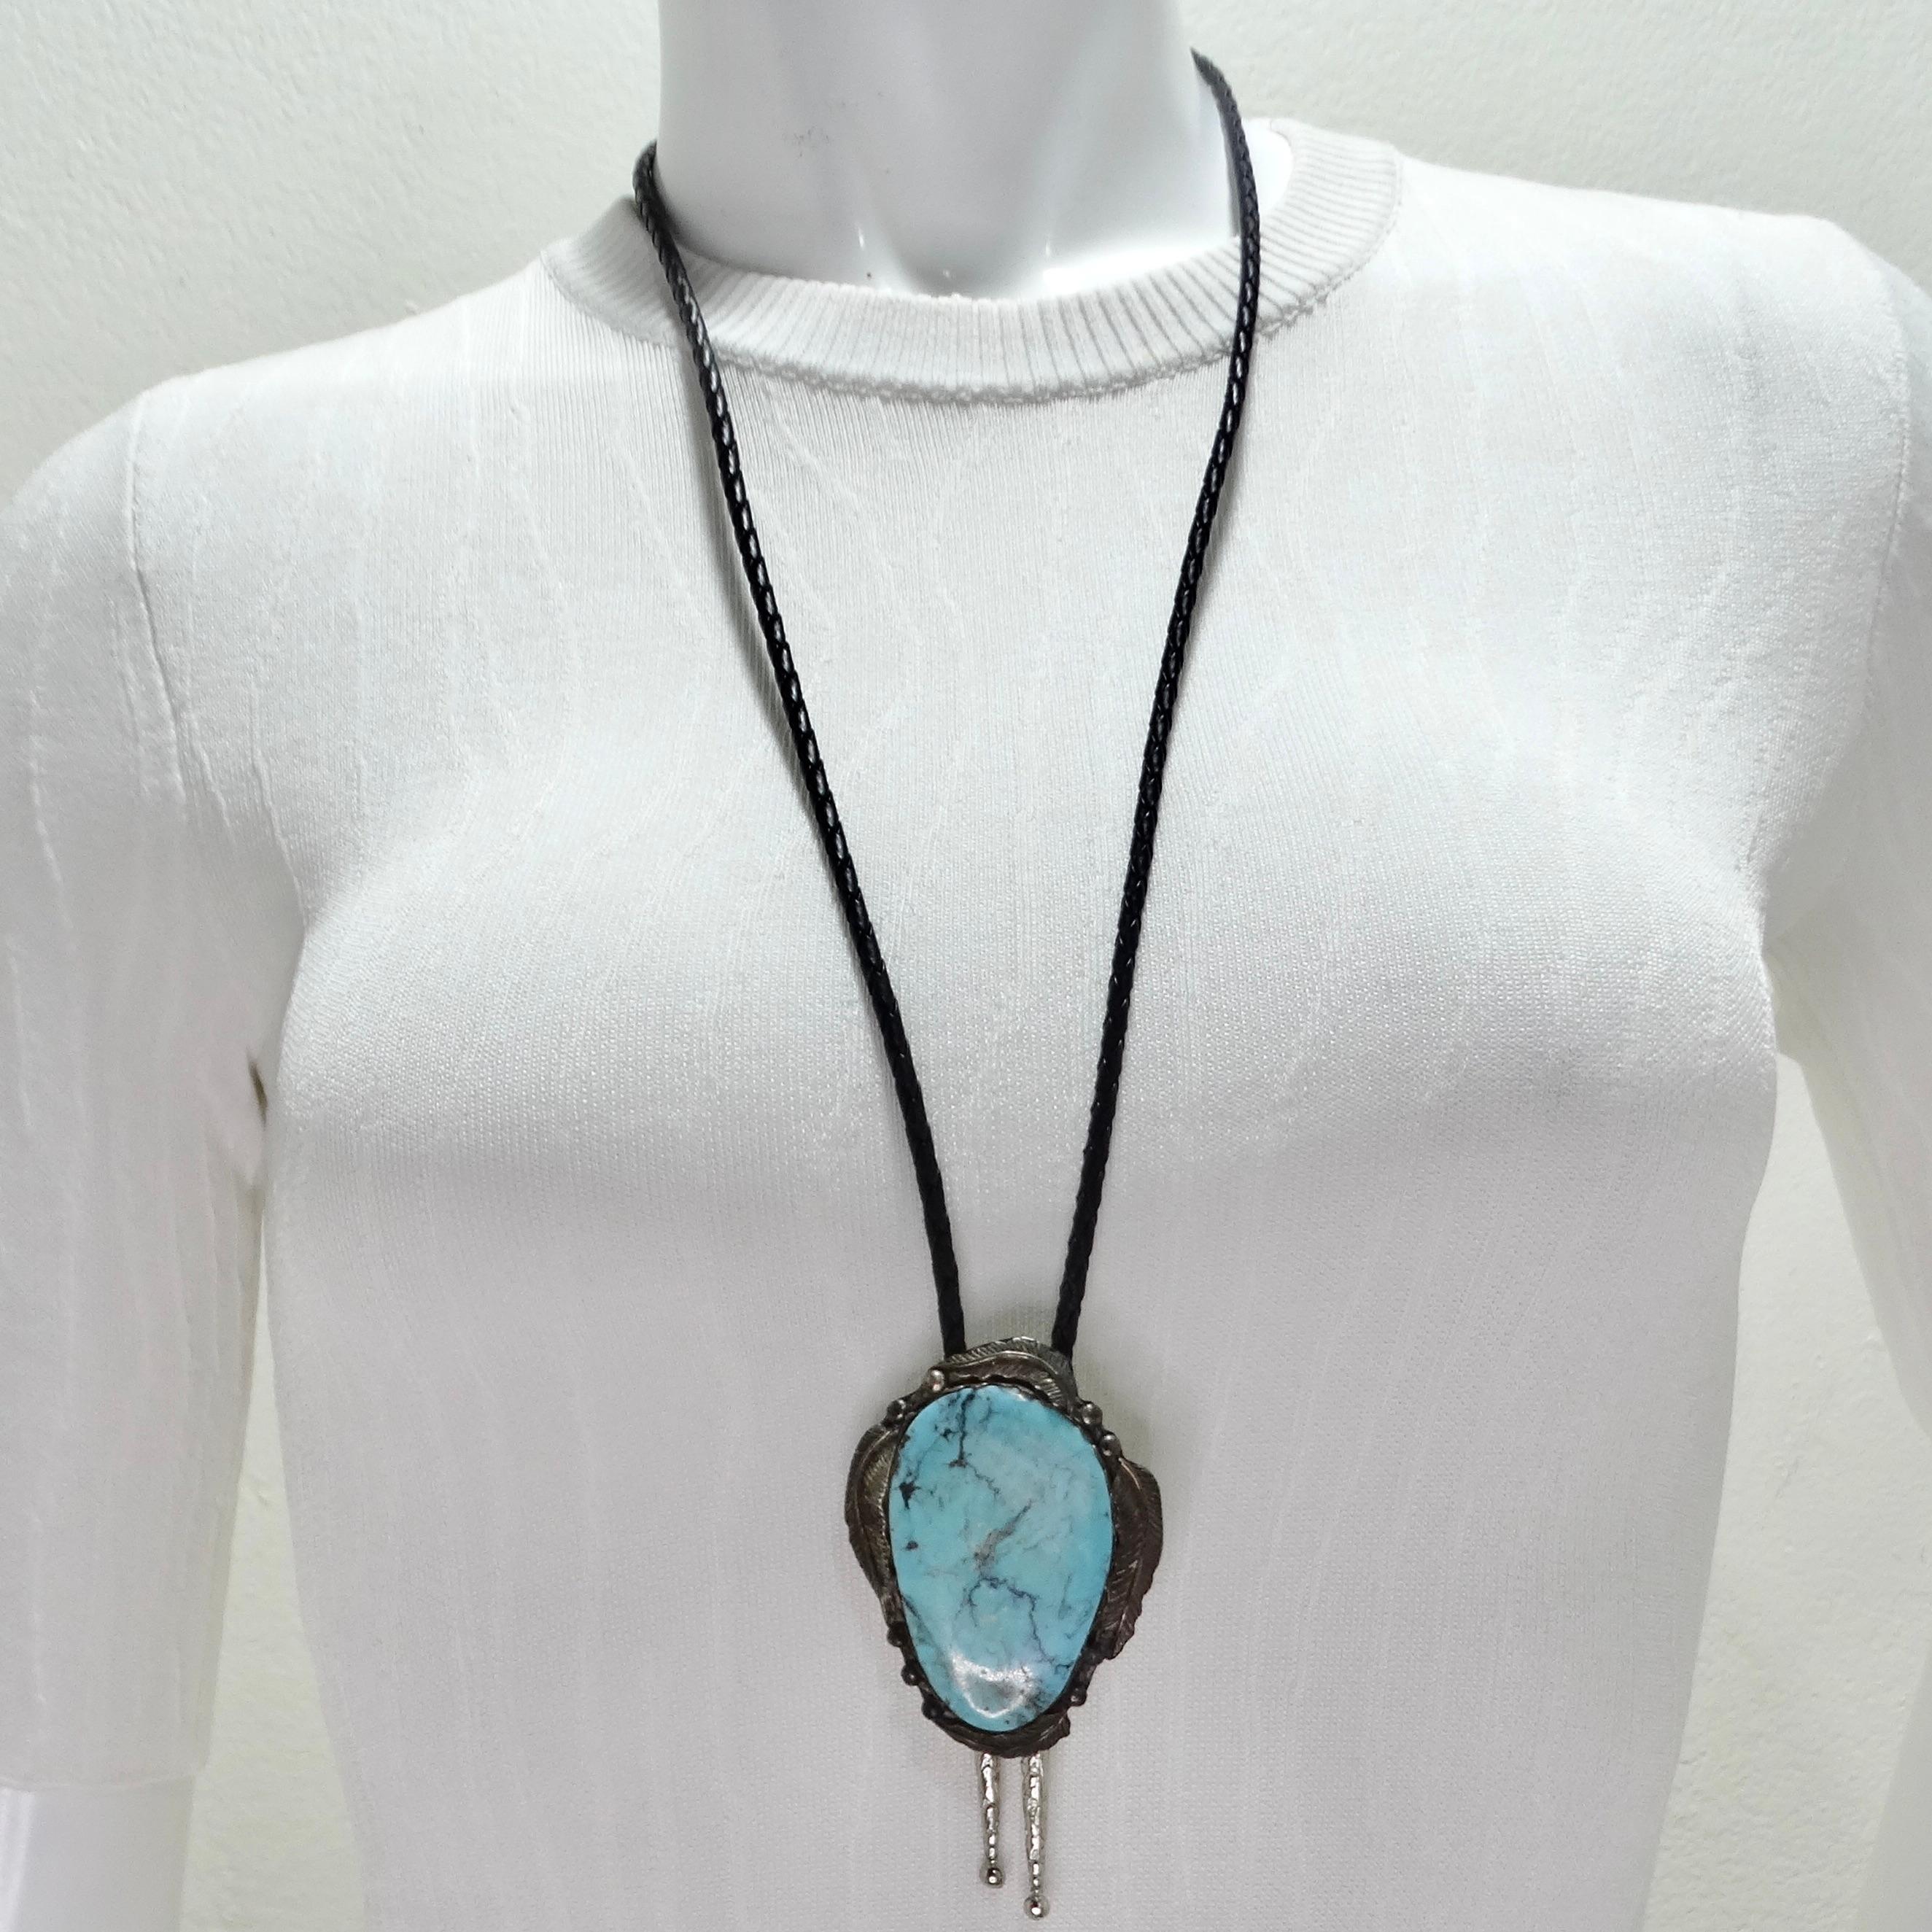 Experience the charm and craftsmanship of the 1960s with this Native American Silver Turquoise Bolo Necklace. This stunning bolo-style necklace features a black chord that highlights a vibrant round turquoise stone set in pure silver. The striking